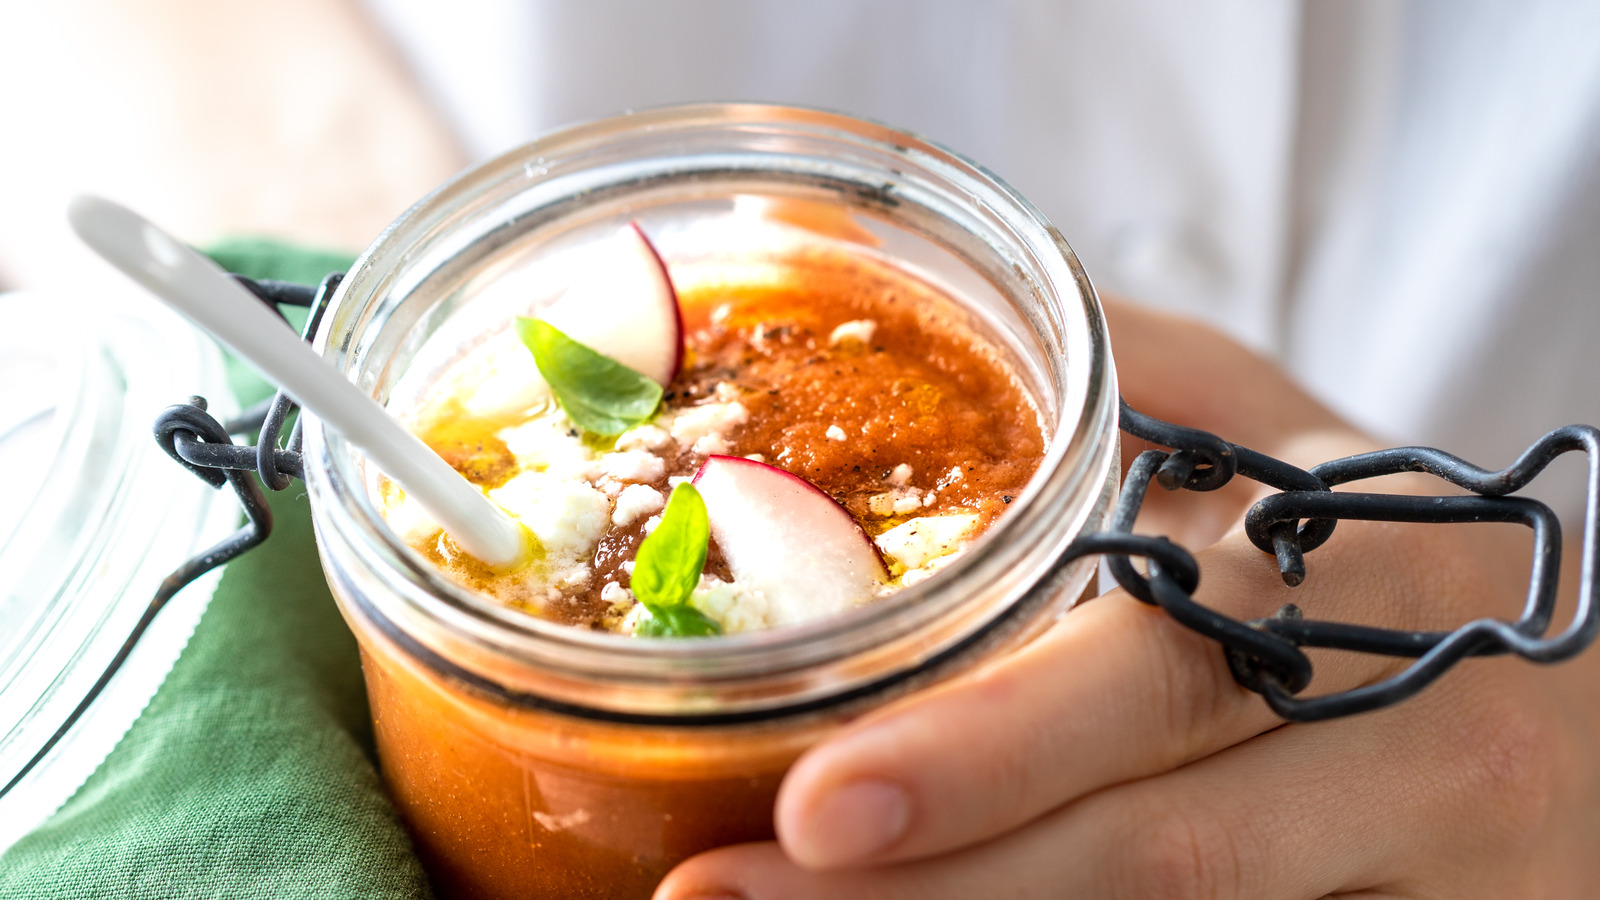 https://www.thedailymeal.com/img/gallery/a-mason-jar-is-your-secret-weapon-for-effortless-make-ahead-soups/l-intro-1700280611.jpg